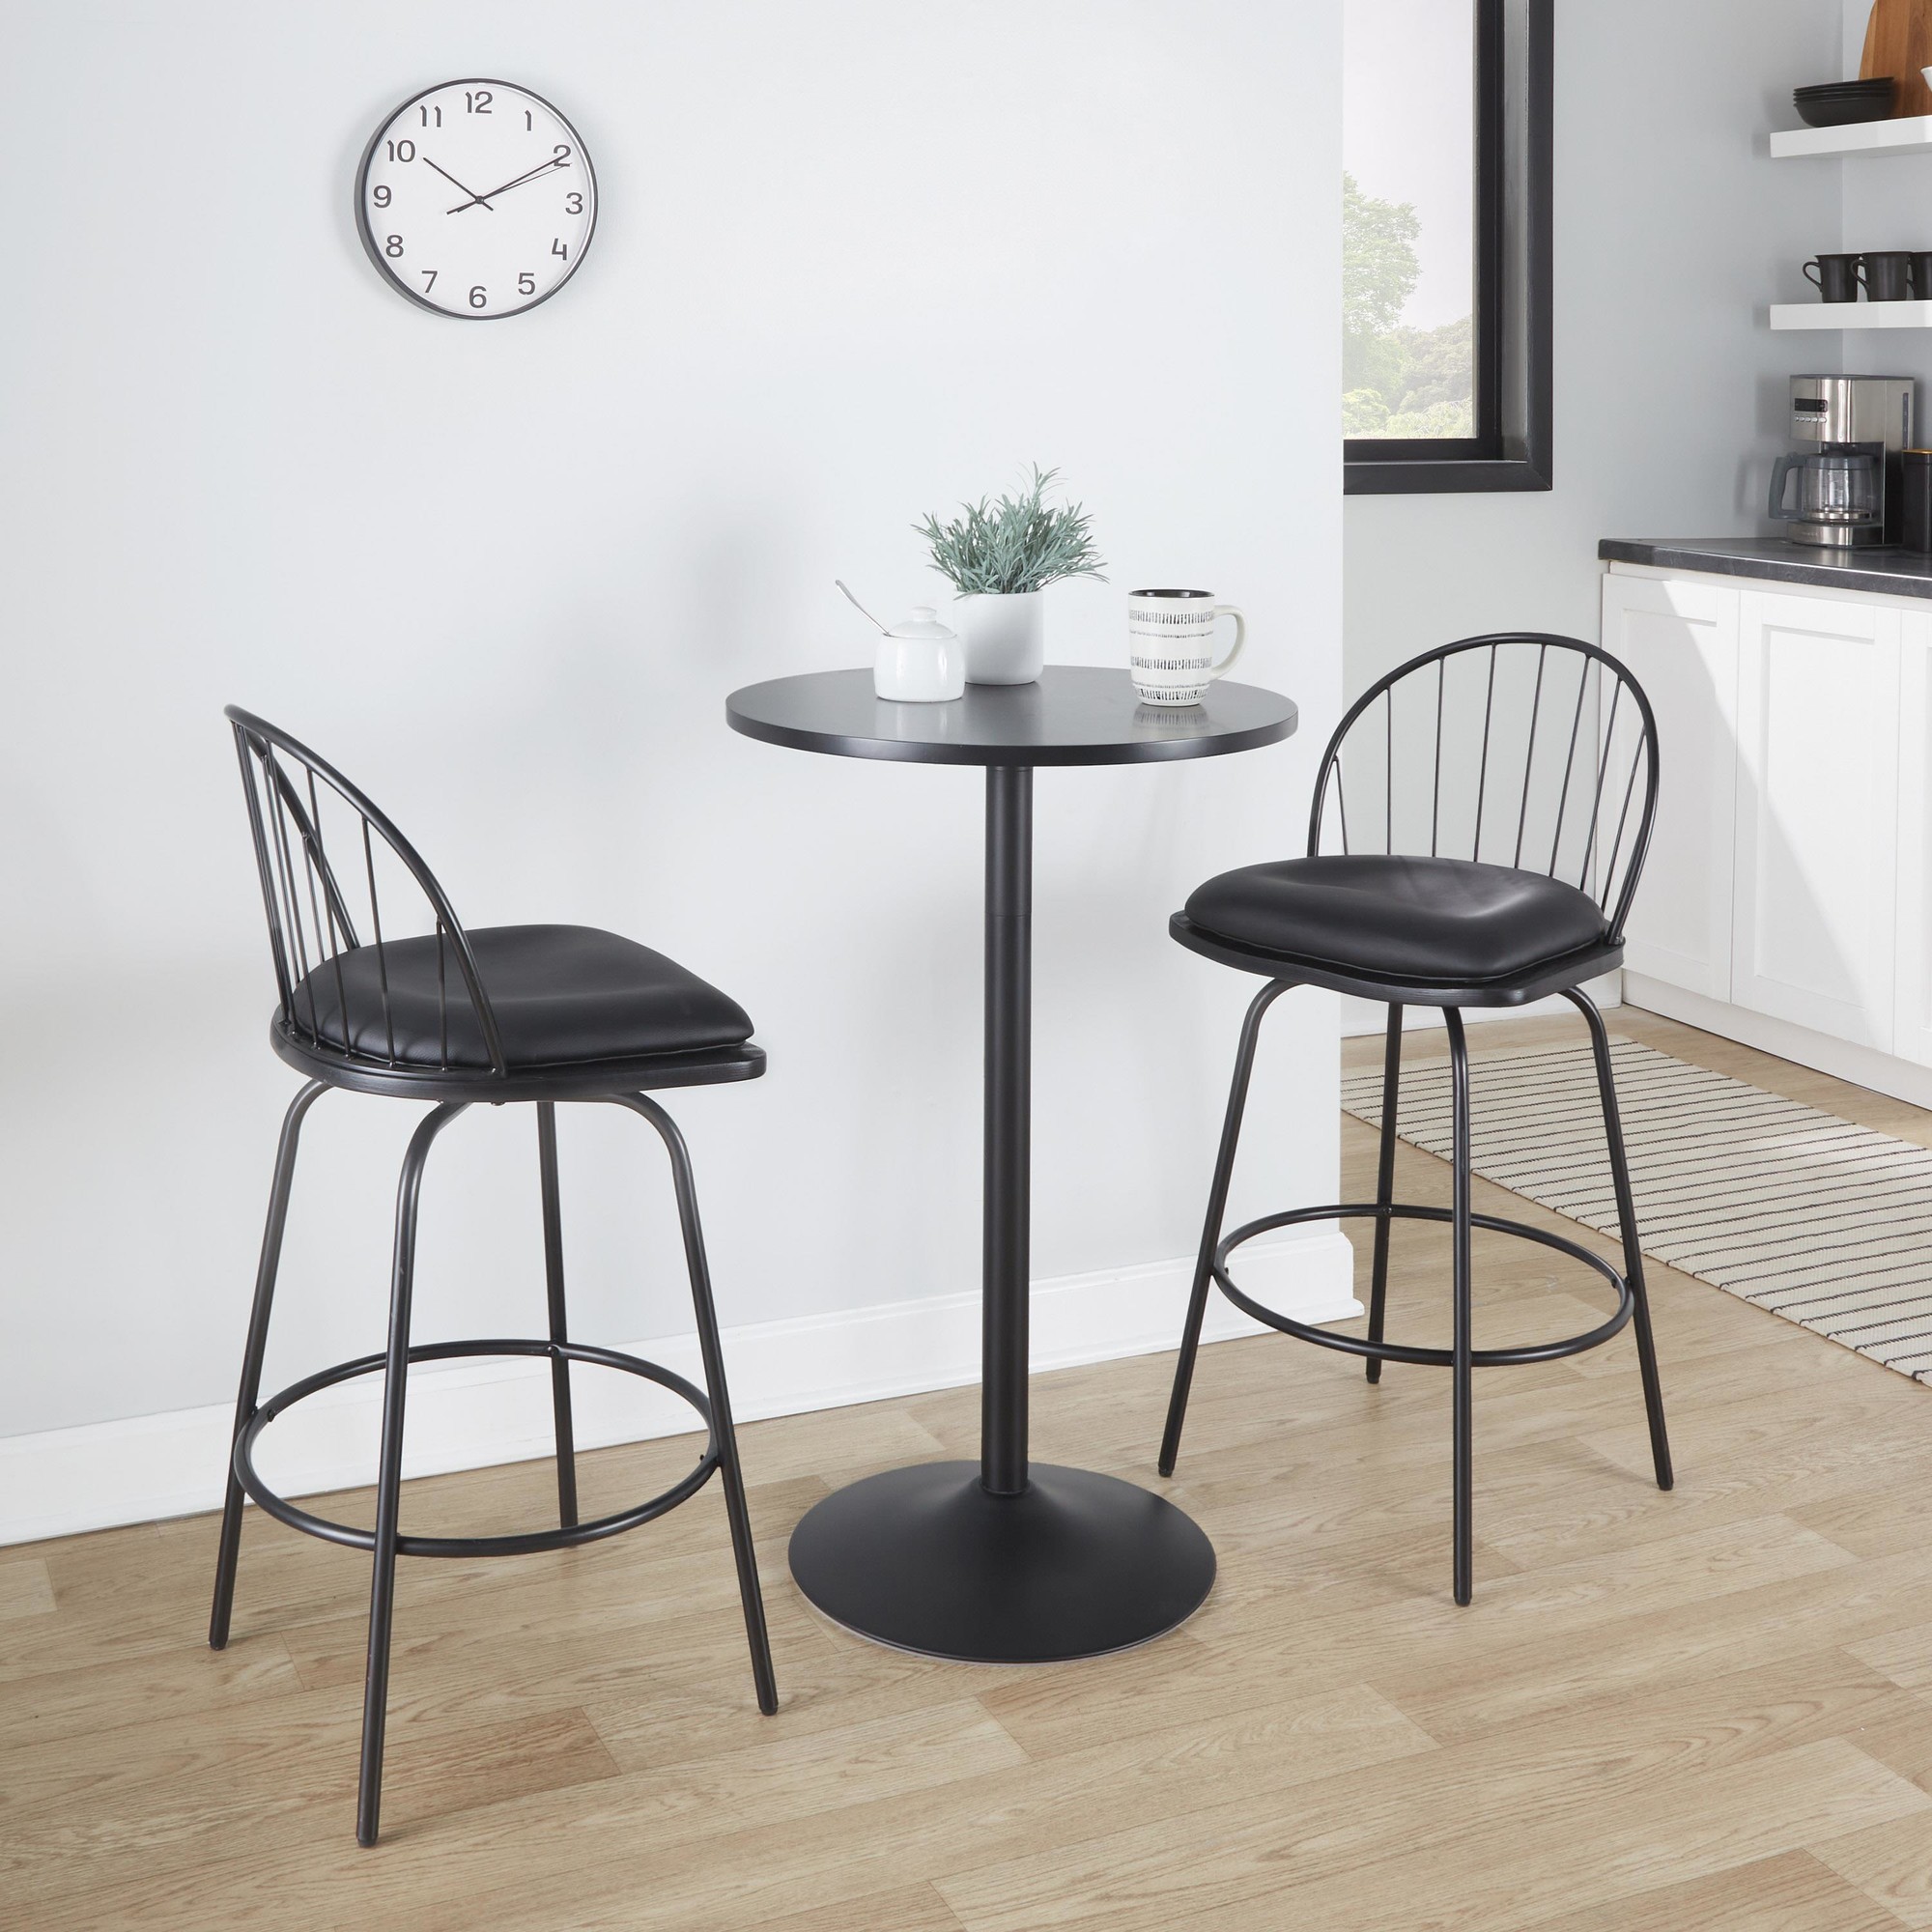 Riley Claire 26" Fixed-height Counter Stool - Set Of 2